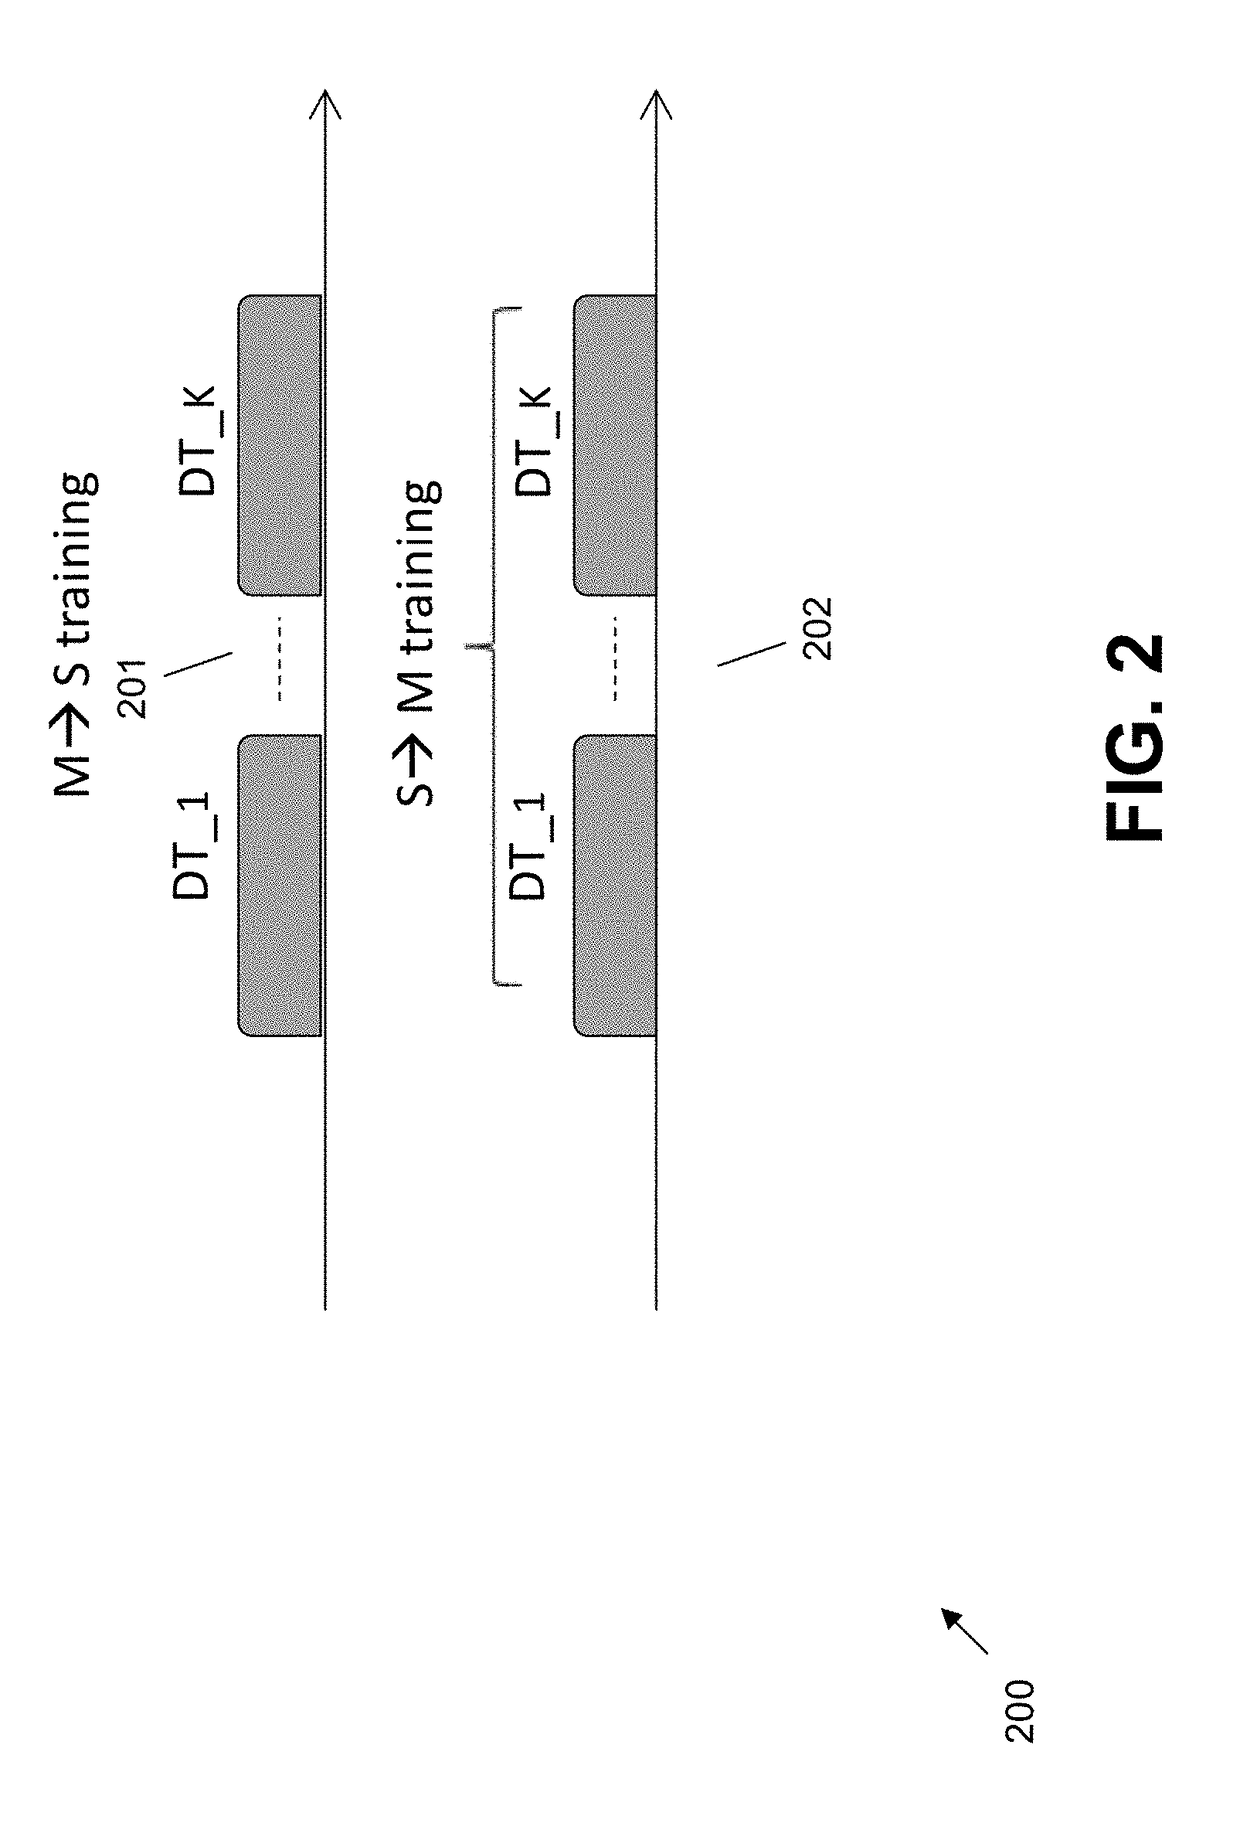 Methods for training of full-duplex wireless systems